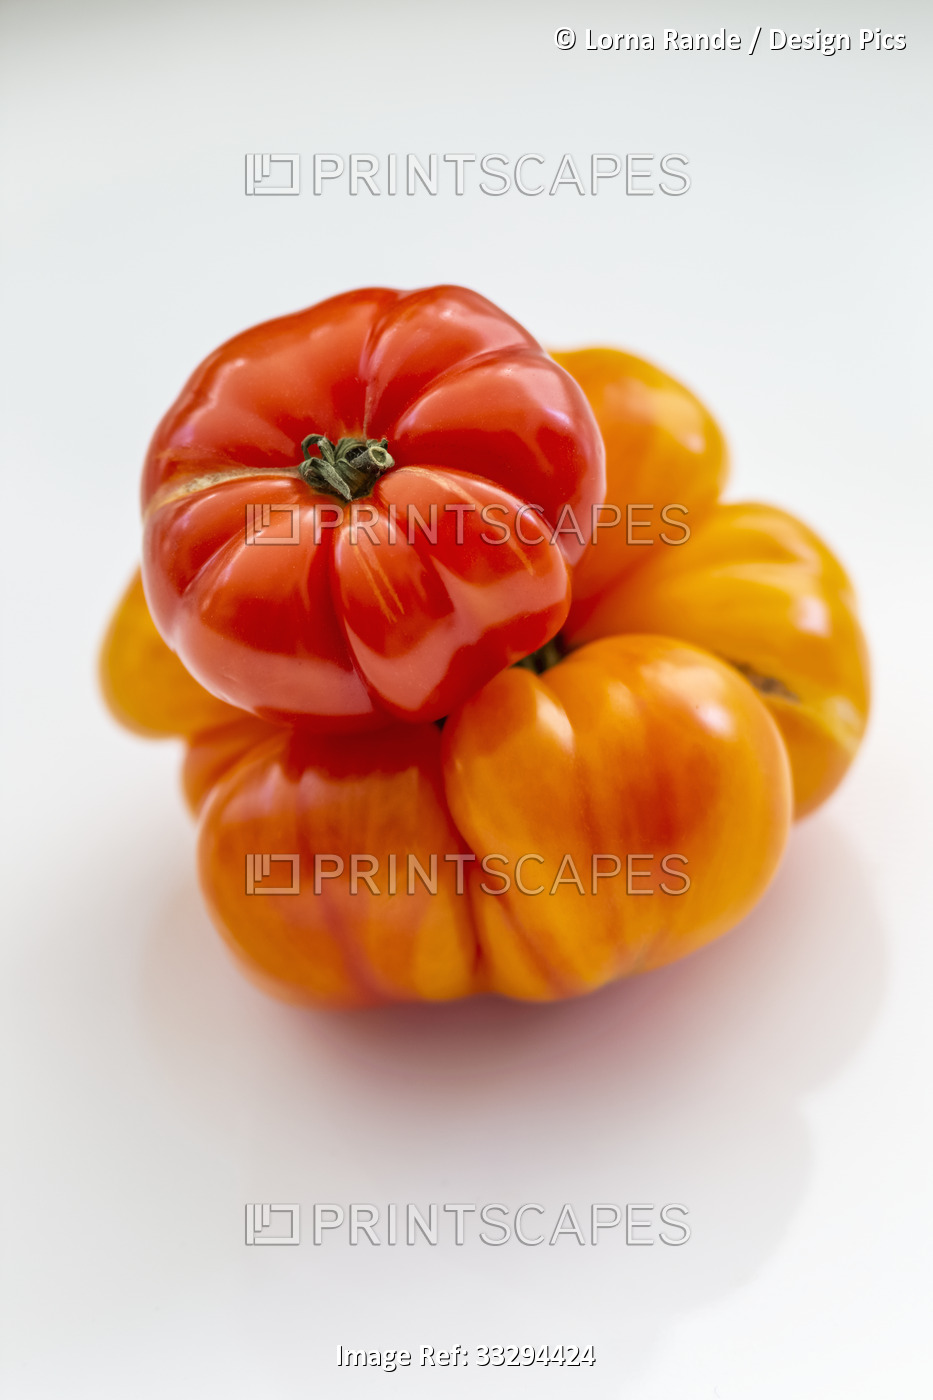 Two varieties and colors of heirloom tomatoes on a white background; Surrey, ...